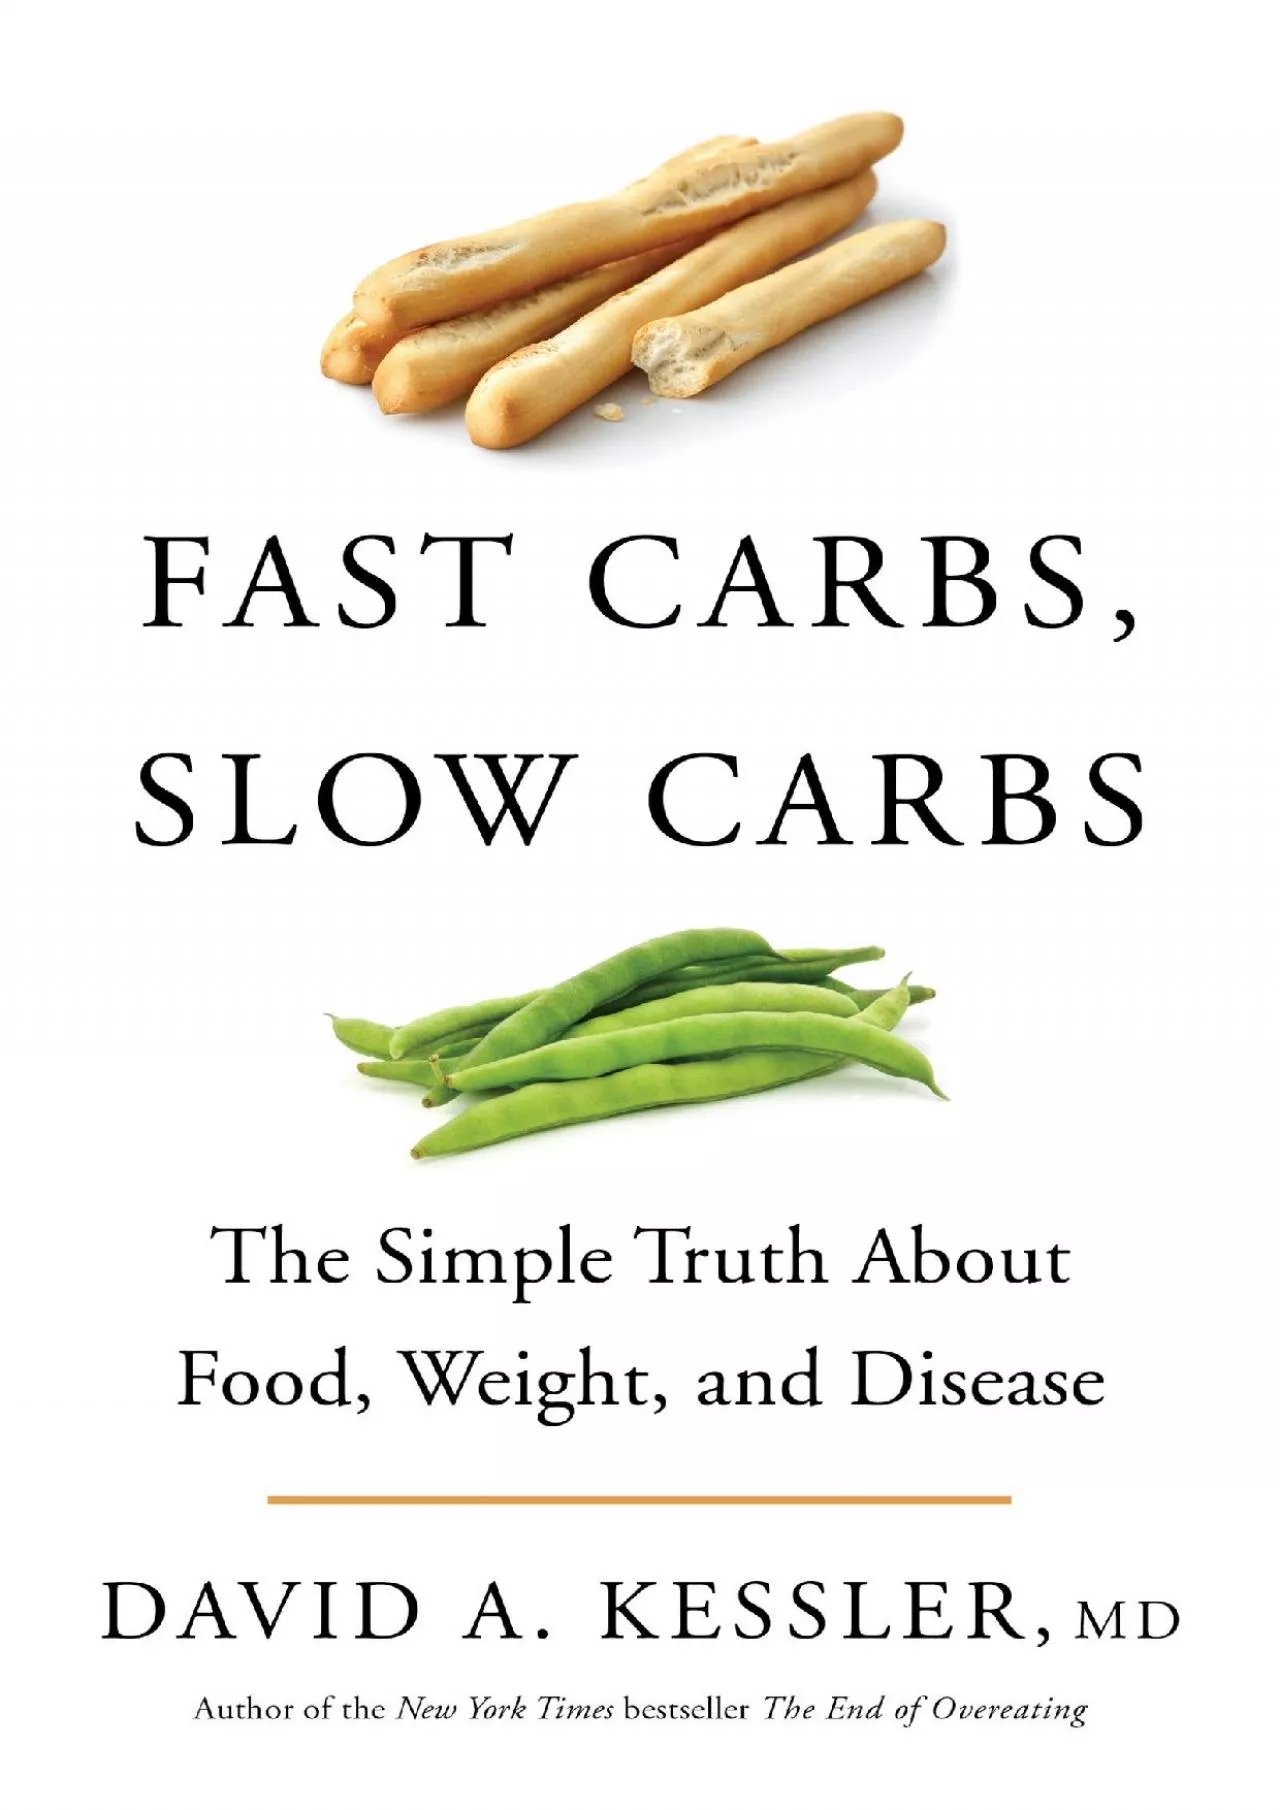 (DOWNLOAD)-Fast Carbs, Slow Carbs: The Simple Truth About Food, Weight, and Disease